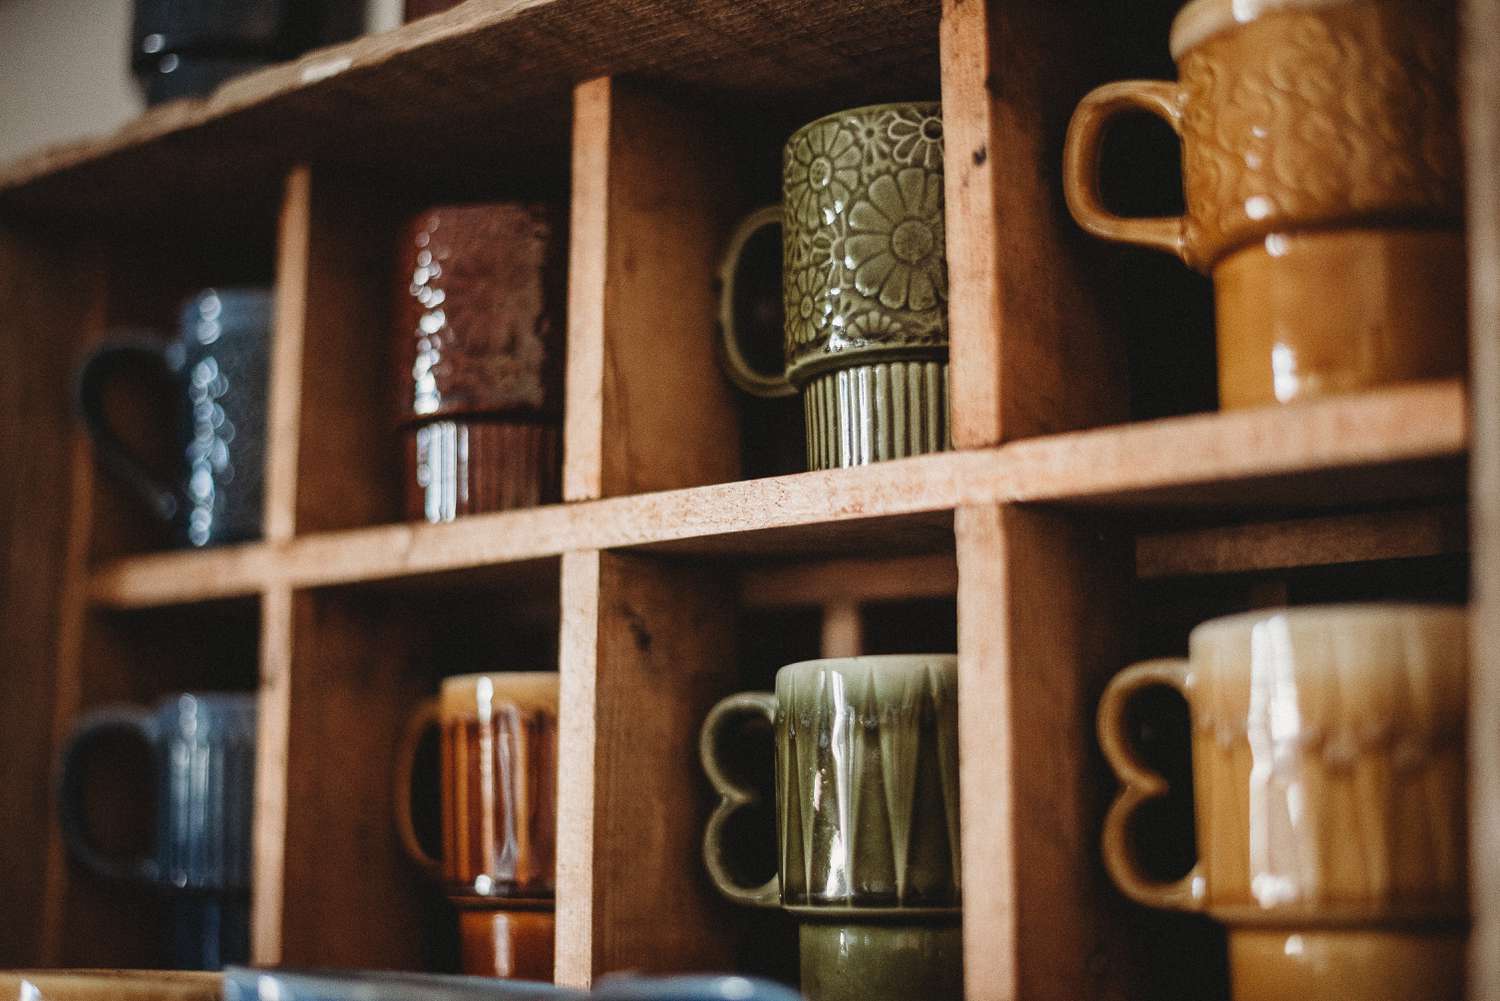 How To Store Coffee Mugs In Cabinet